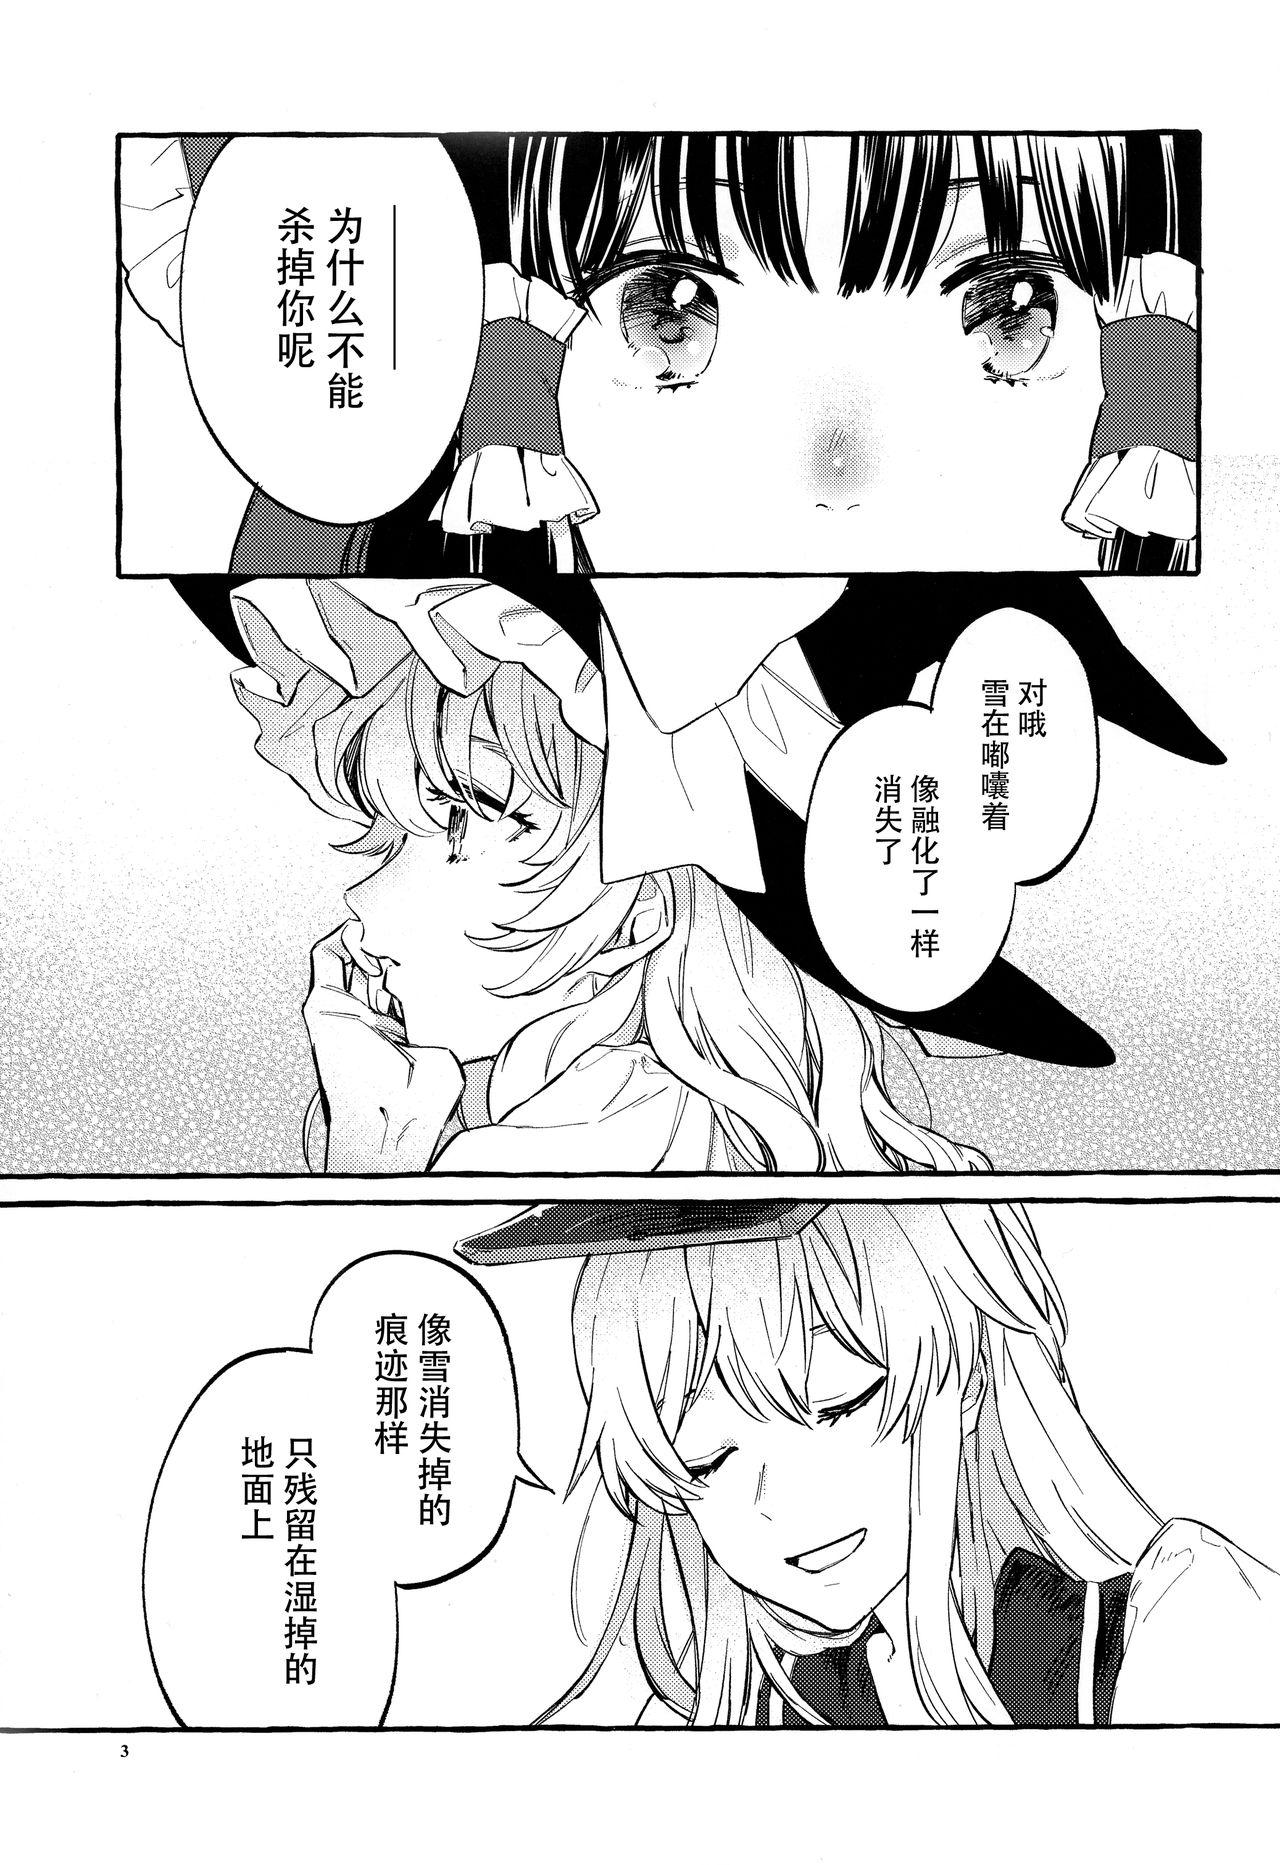 Women Sucking Dicks Happy End Standard - Touhou project Hood - Page 2